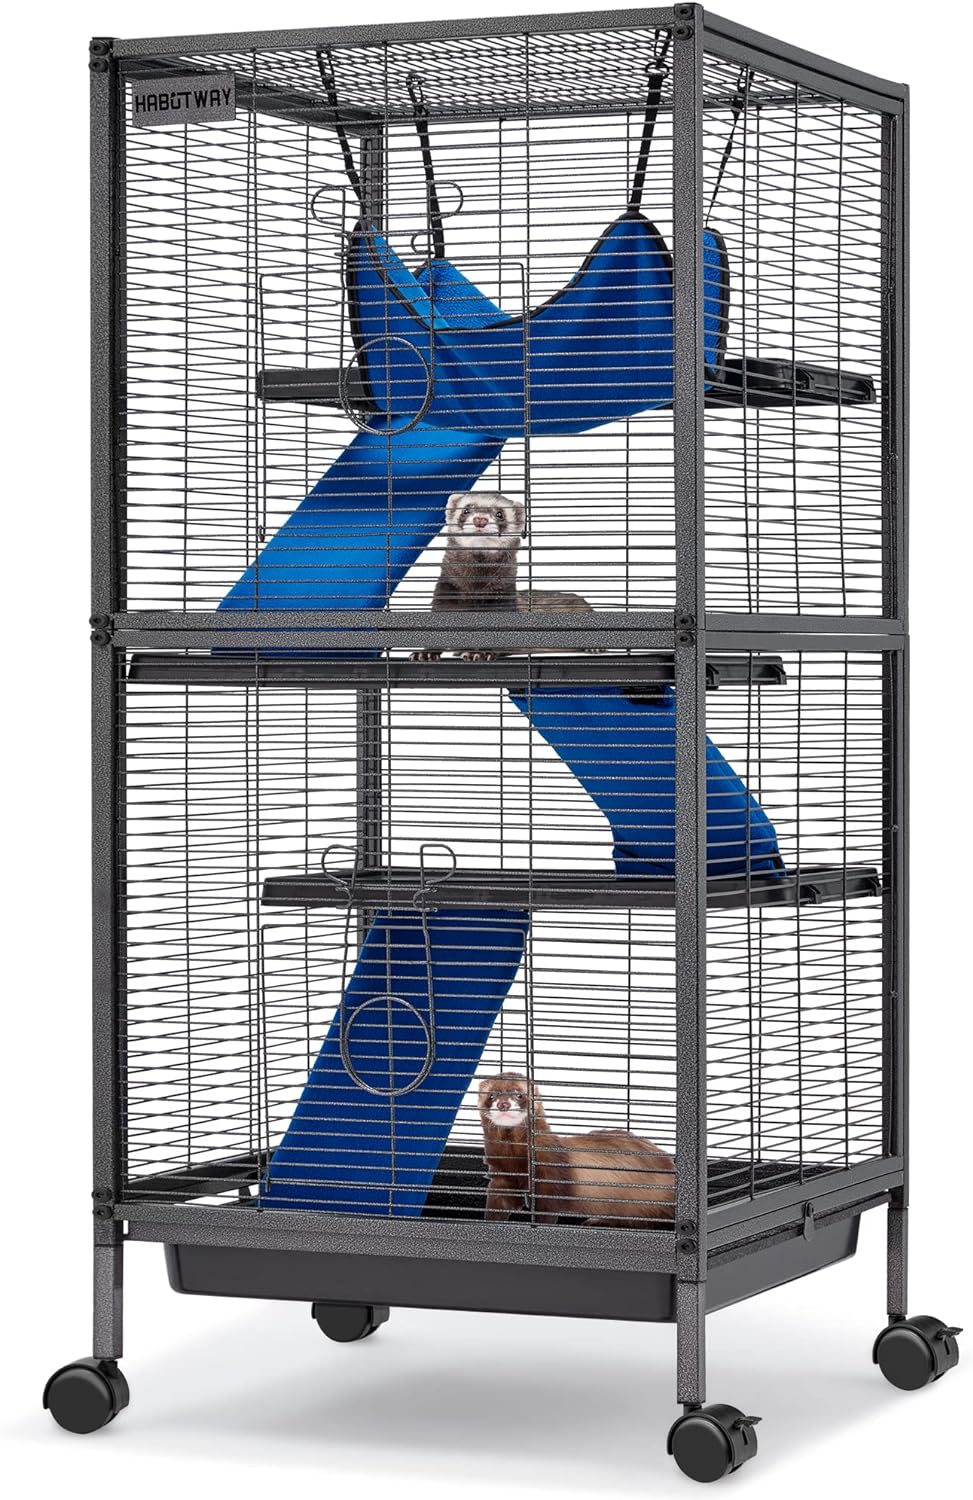 HABUTWAY 45''H Metal Small Animal Cages, Rolling Chinchilla Cage with Removable Ramps, Lagre Critter Nation Cage for Chinchillas/Guinea Pigs/Rabbit, Ferret Cages with Hammock & 4 Tiers, Black